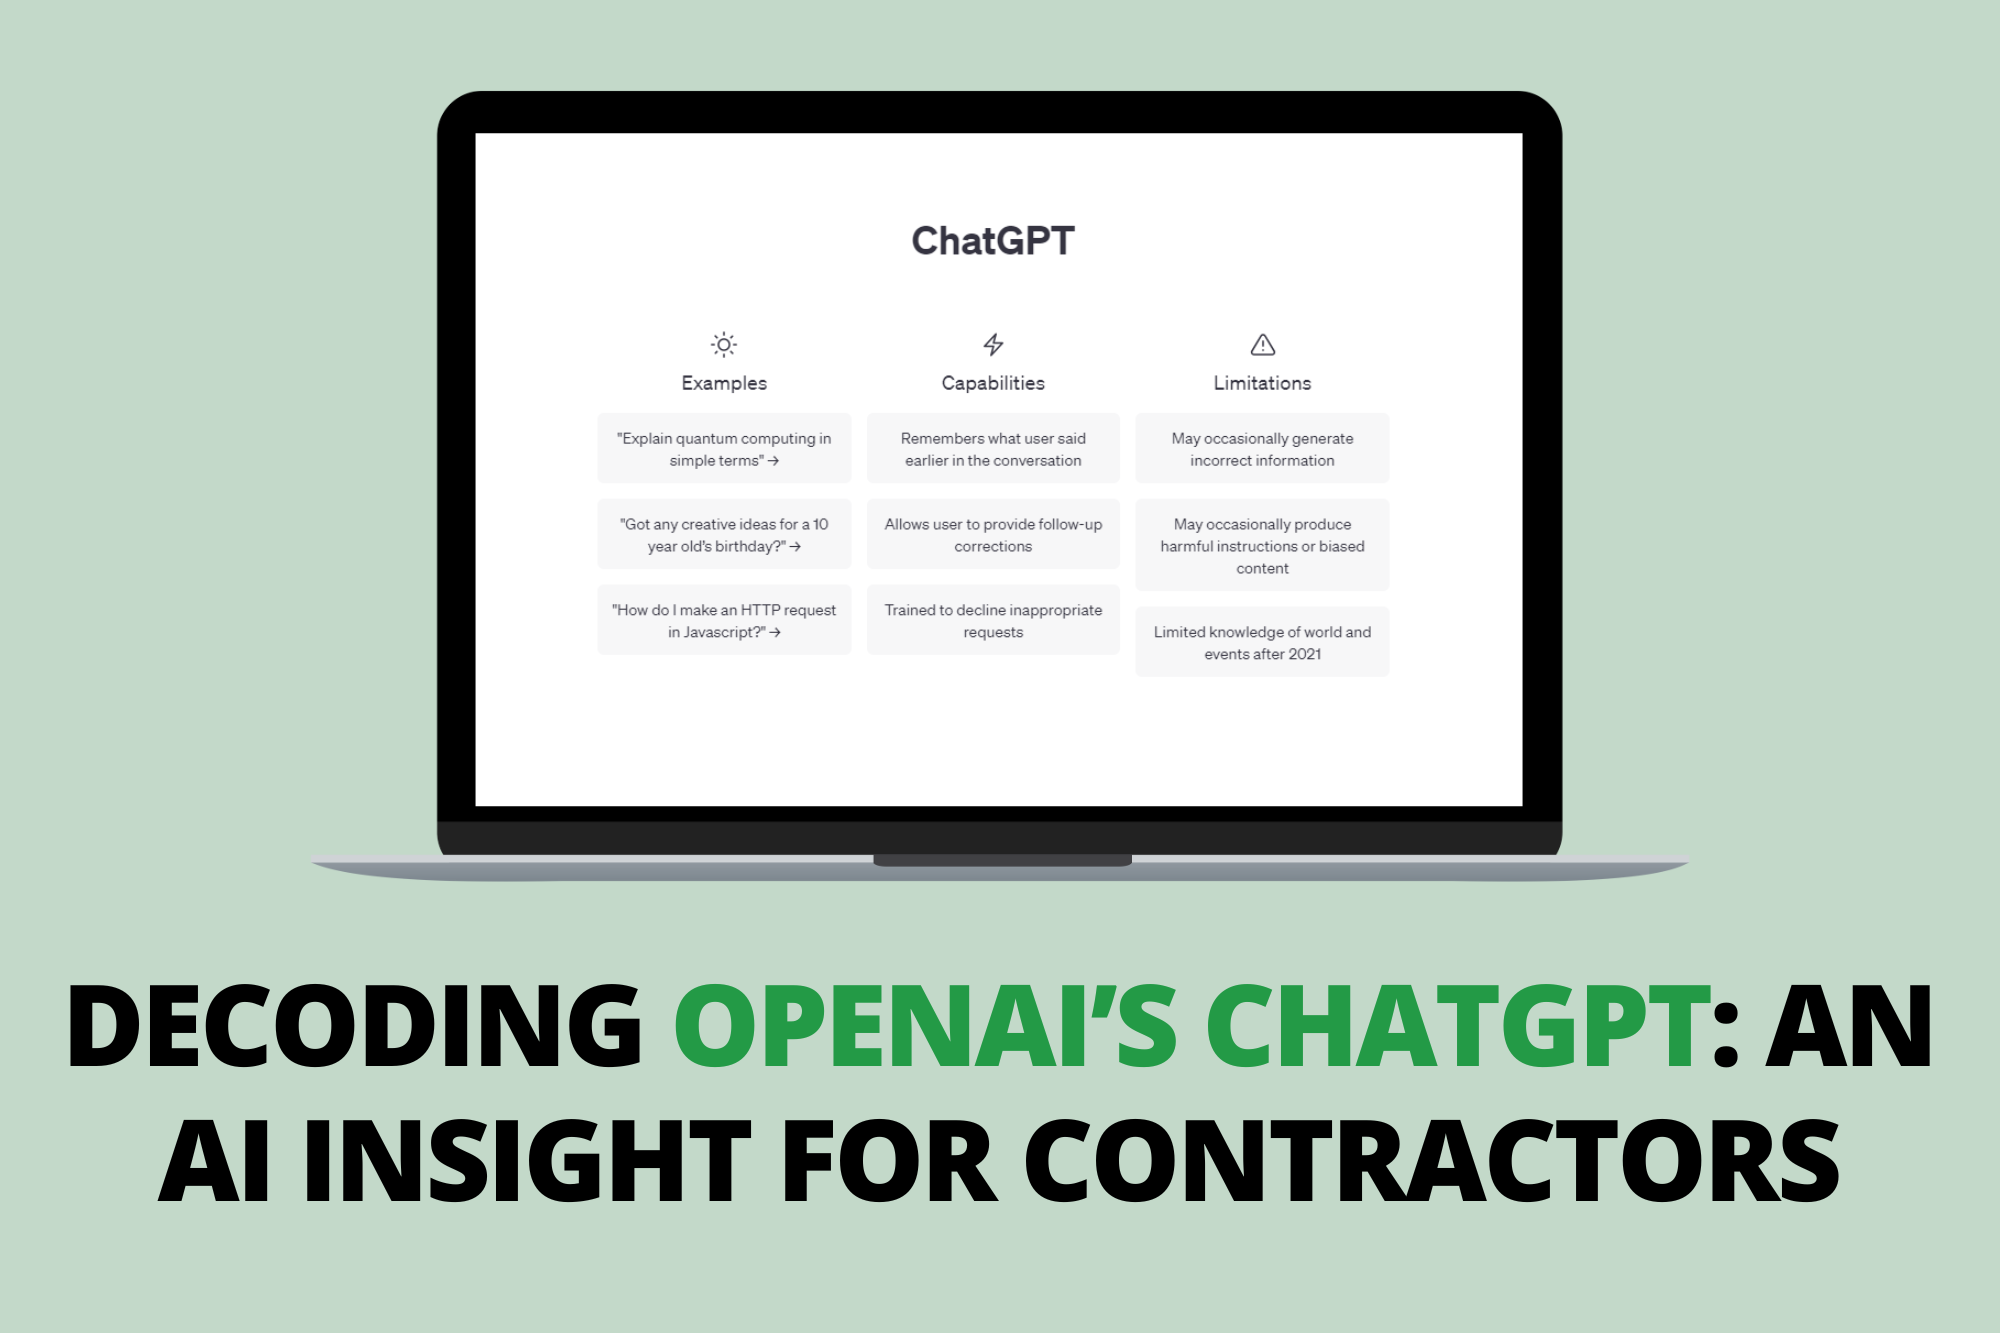 Decoding OpenAI’s ChatGPT: An AI Insight for Contractors